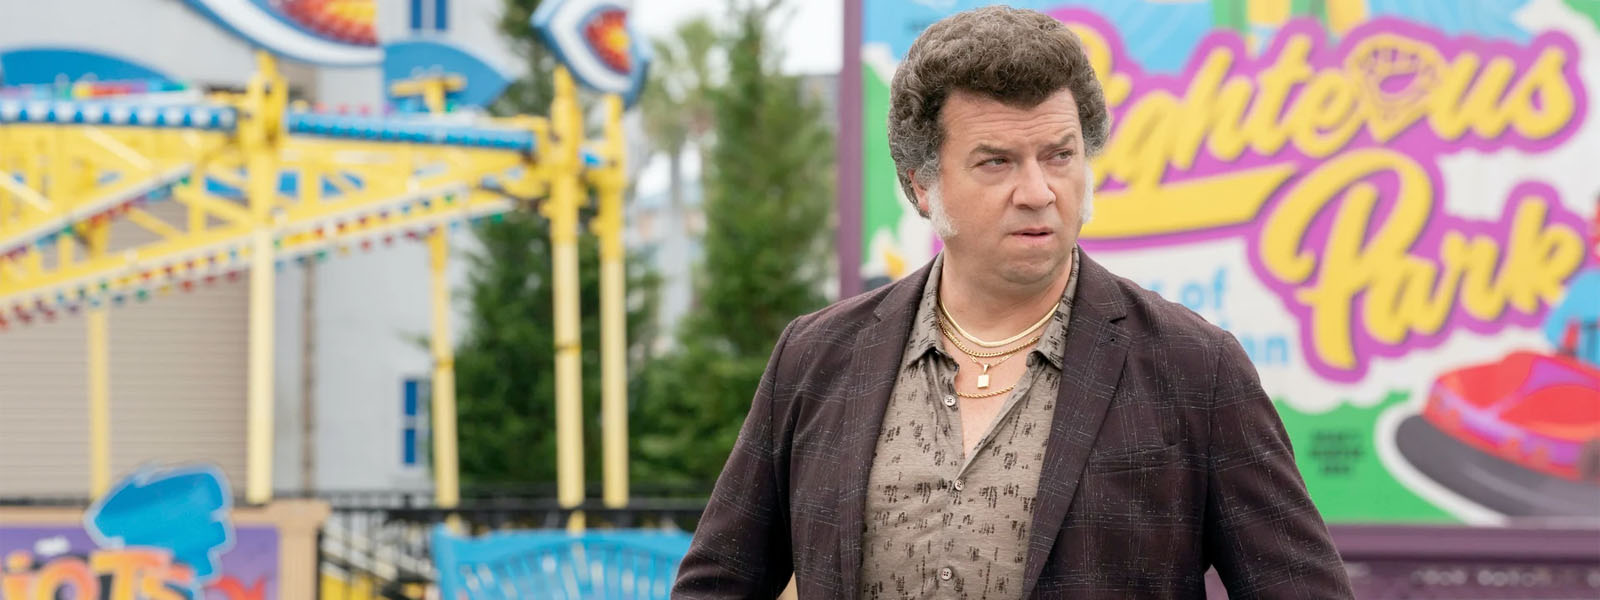 Fearlessly funny: How Film alumus Danny McBride is reshaping comedy | READ MORE >>